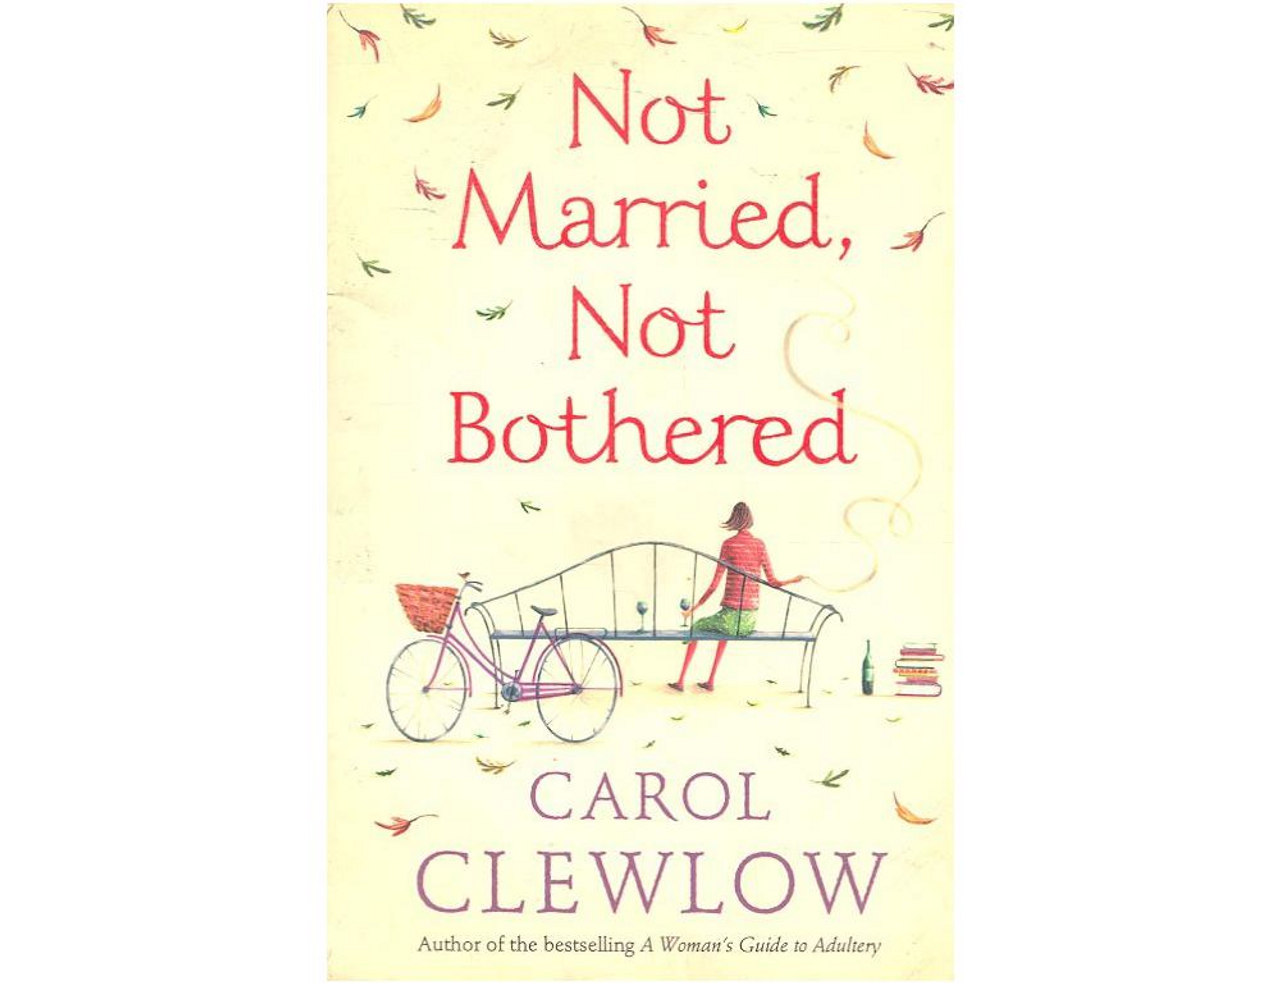 Carol Clewlow / Not Married, Not Bothered